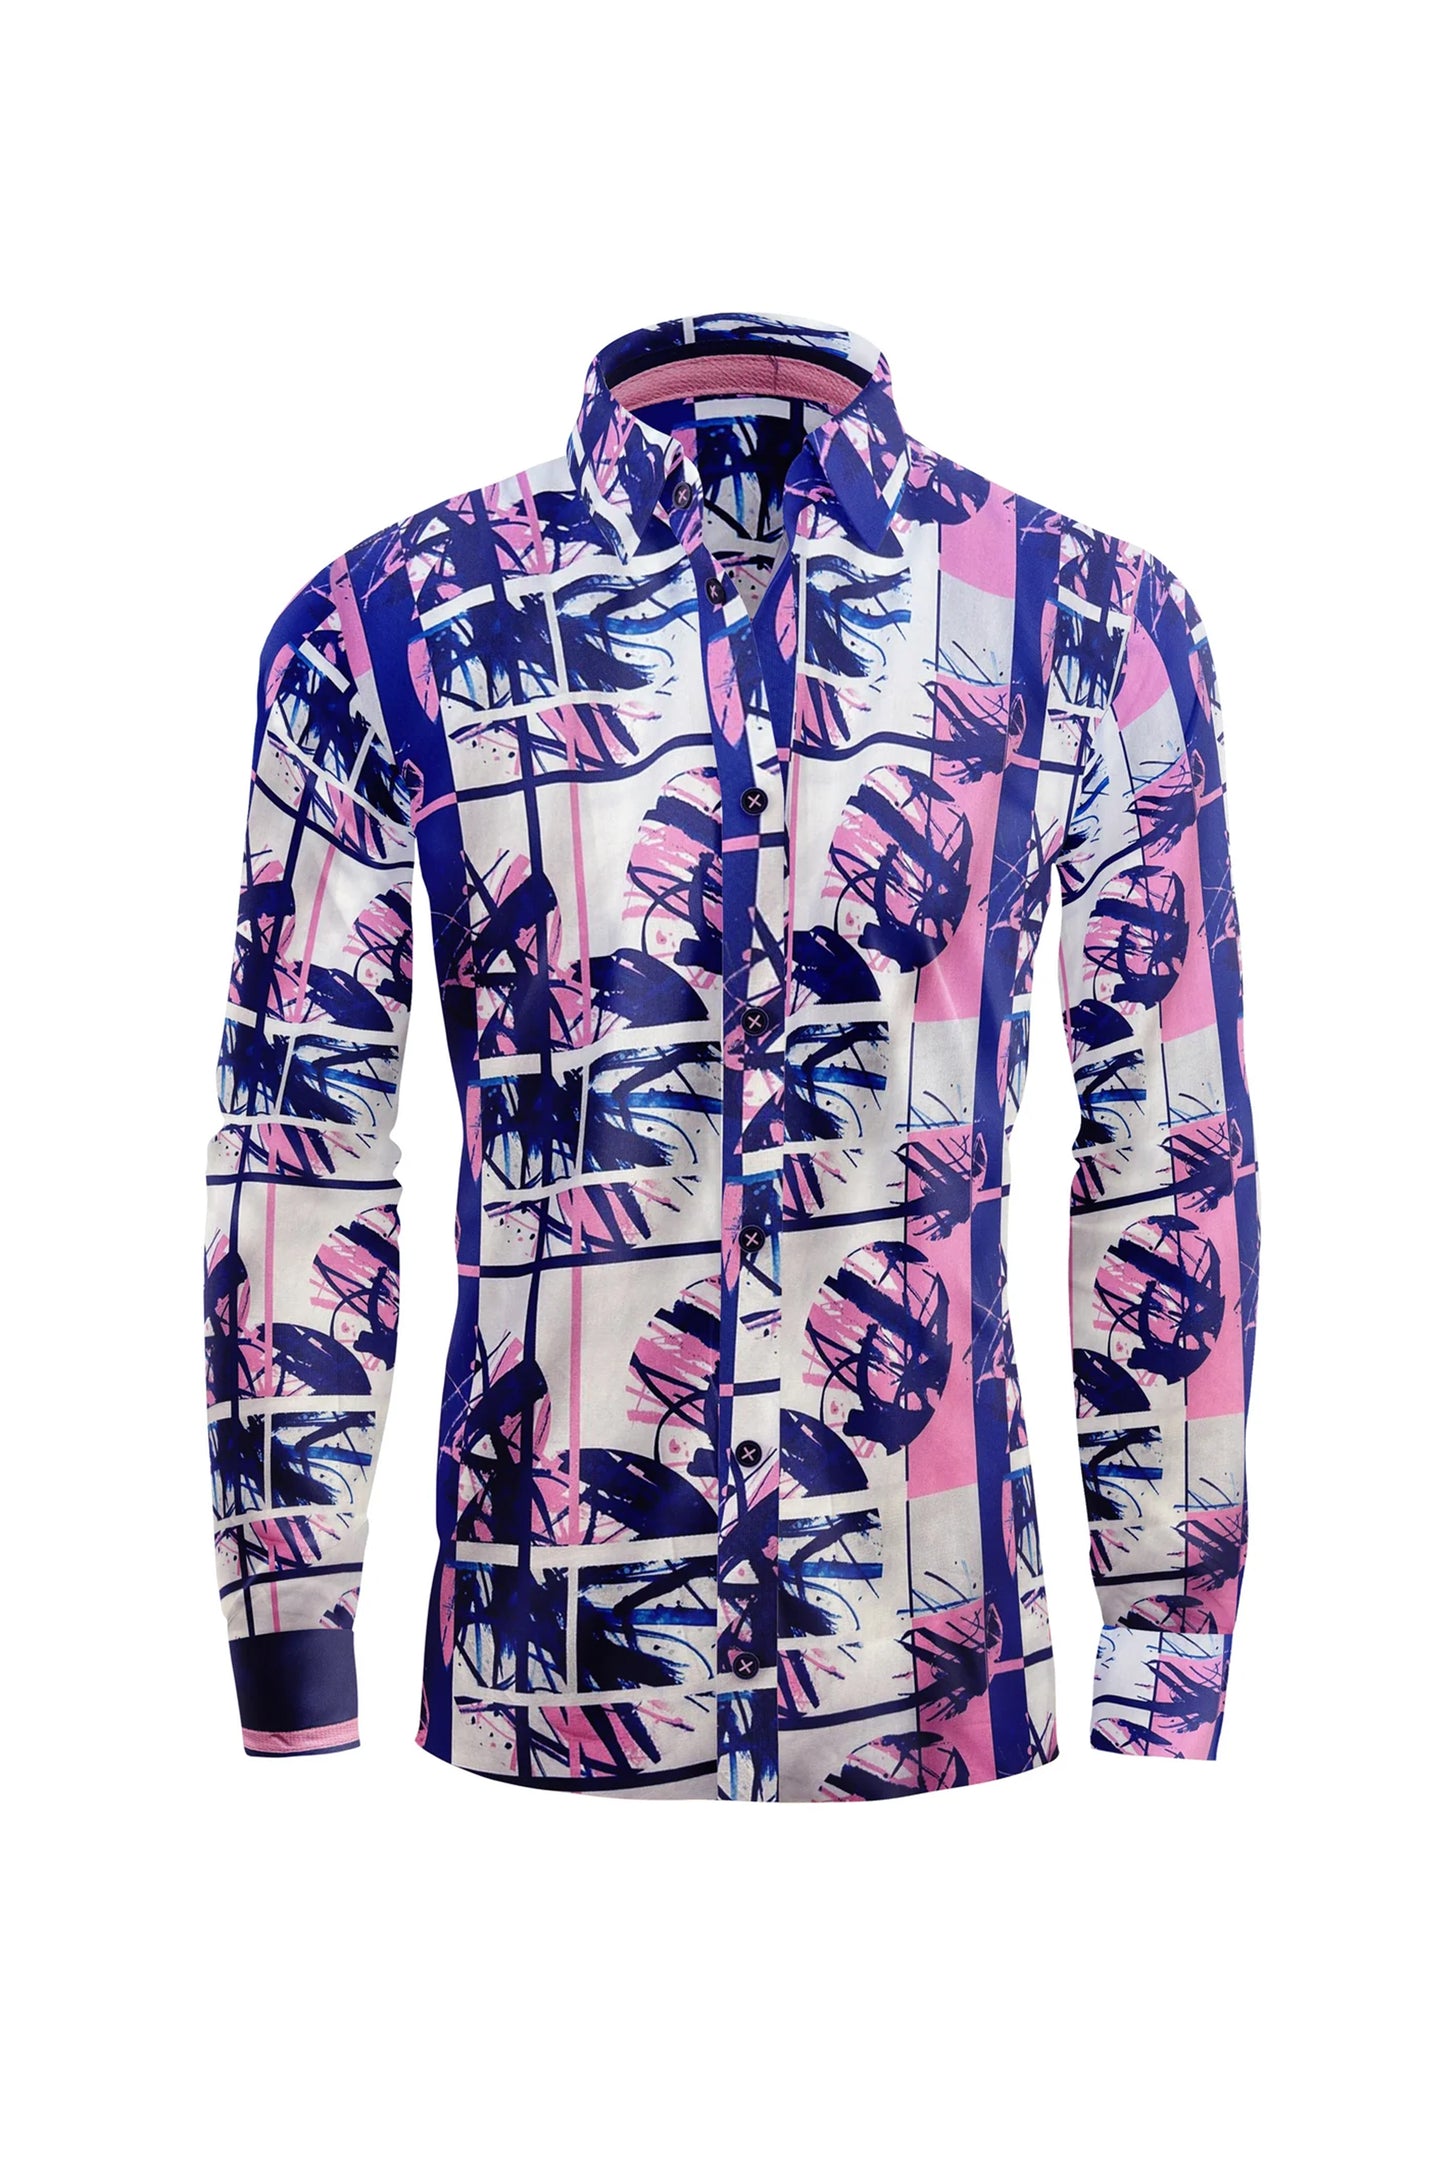 Pink Abstract Artistry Men's Casual Shirt CASUAL SHIRT On Sale 30% Off Vercini